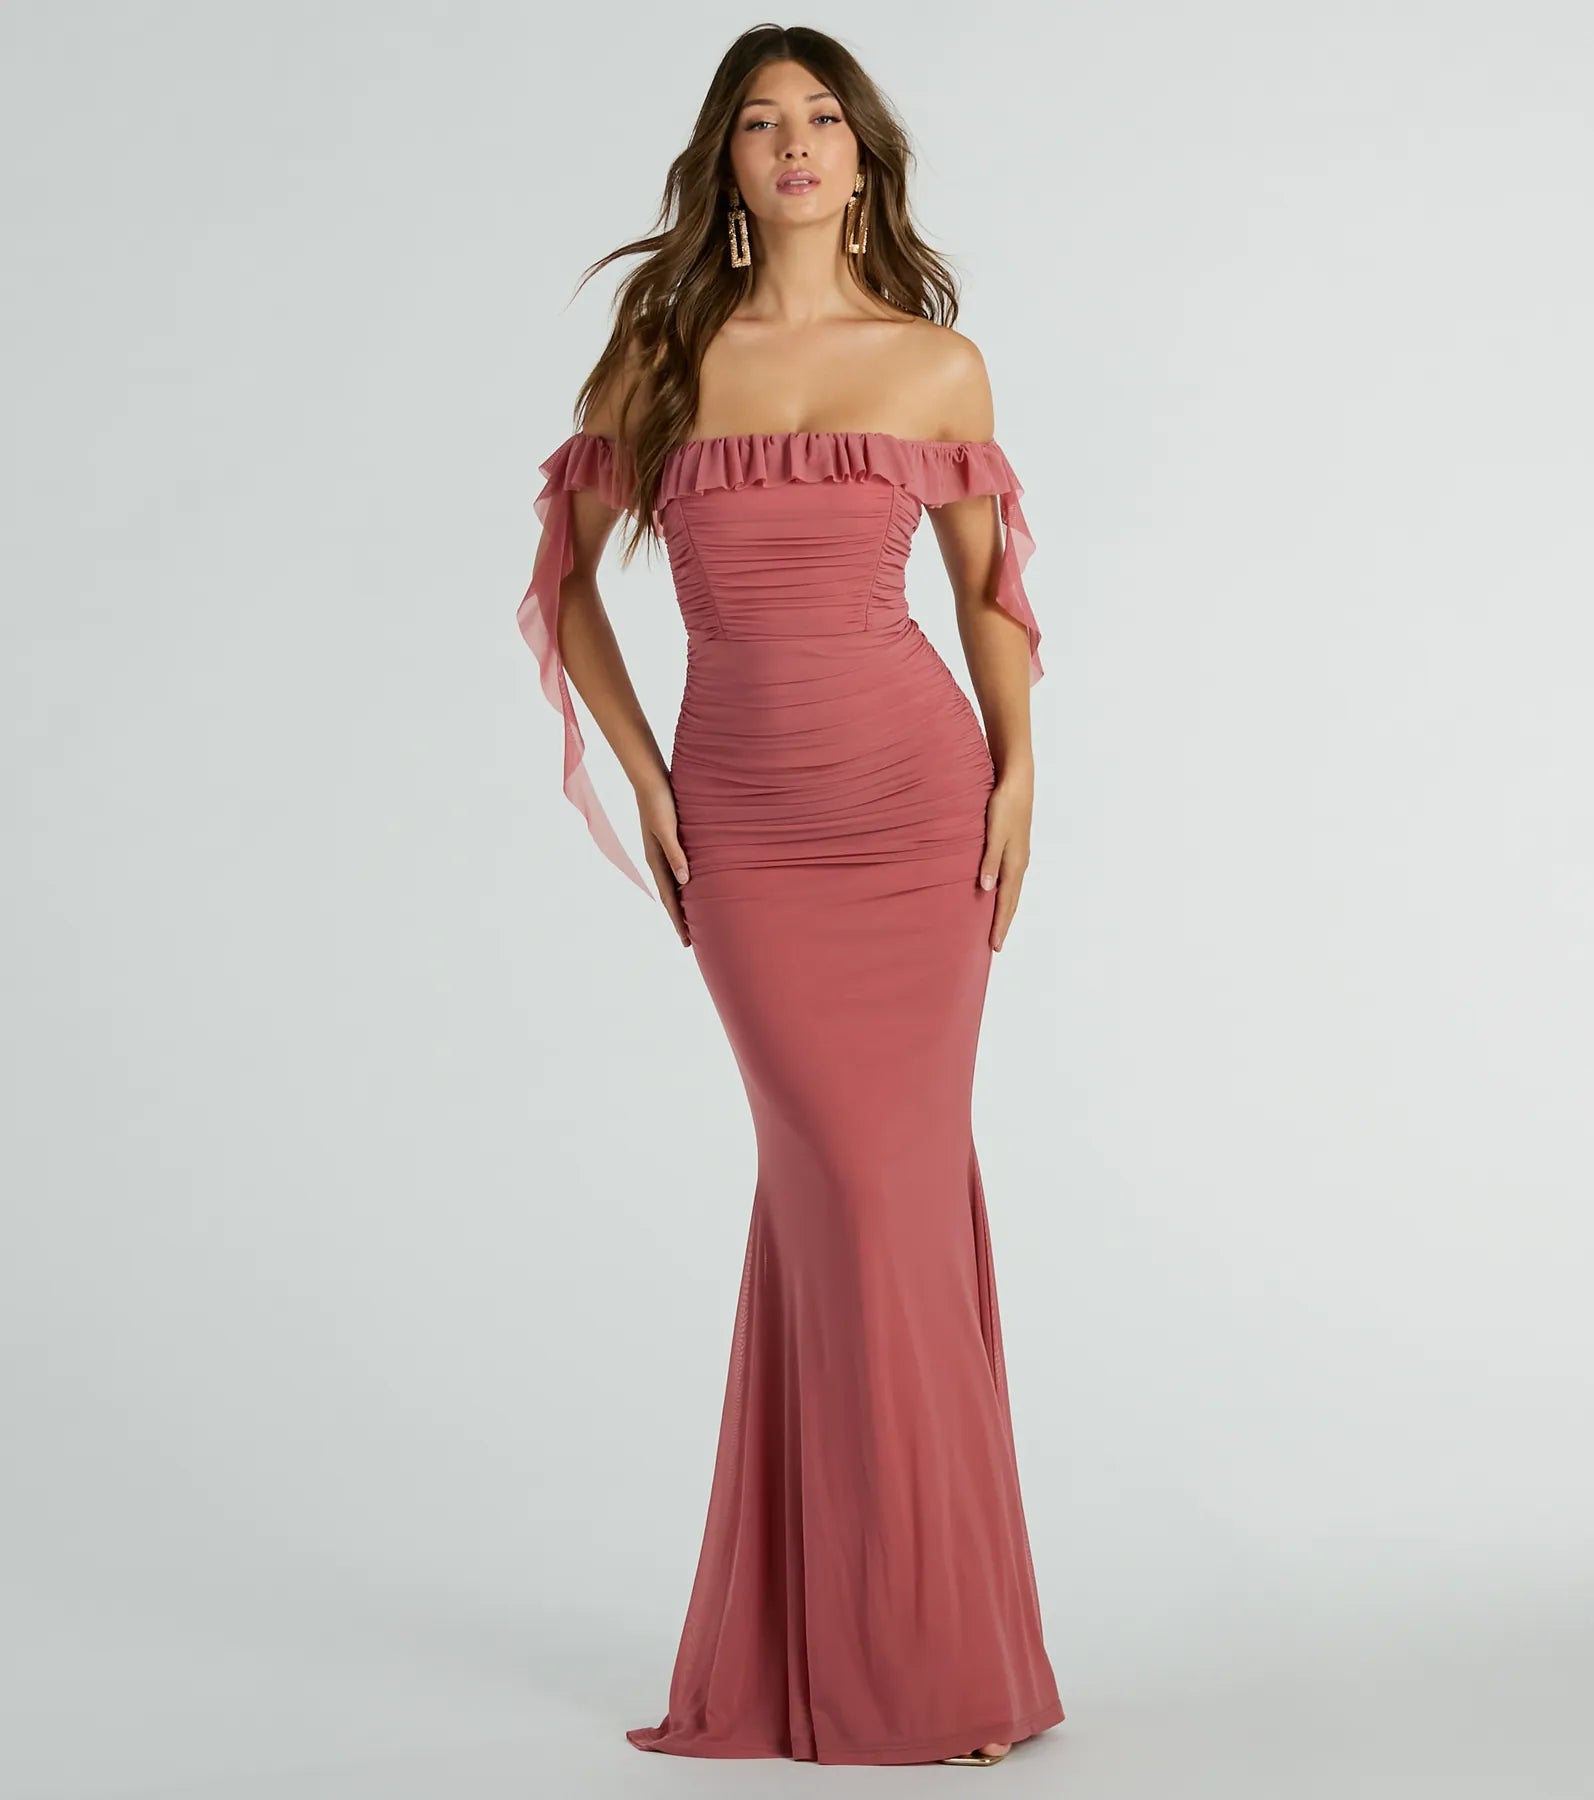 Sexy Sophisticated Mermaid Off the Shoulder Stretchy Ruched Mesh Knit Maxi Dress With Ruffles